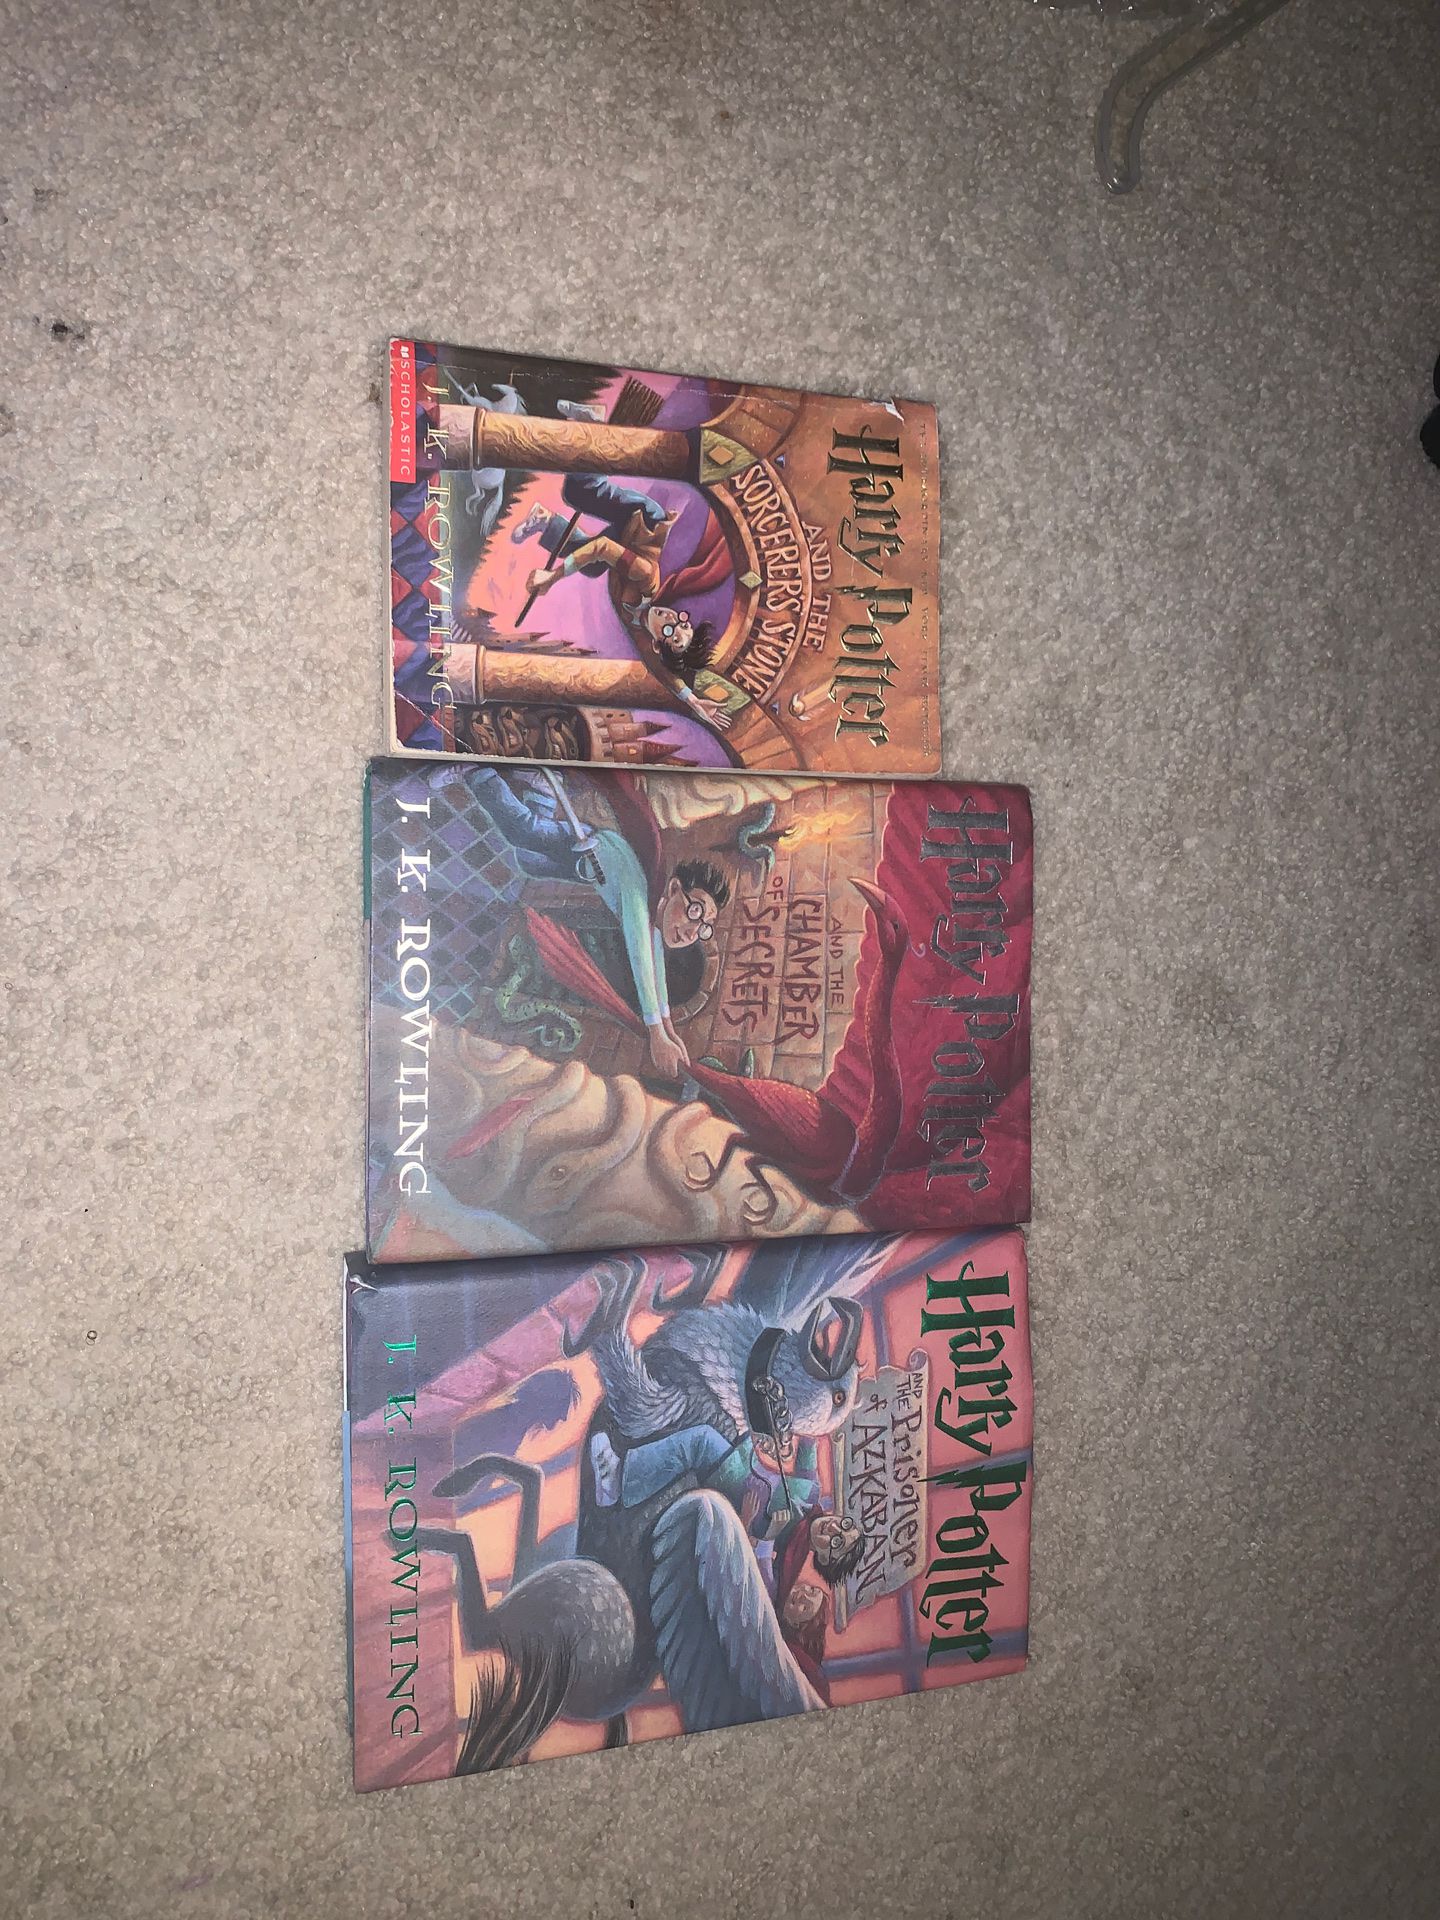 First 3 Harry Potter books - like new